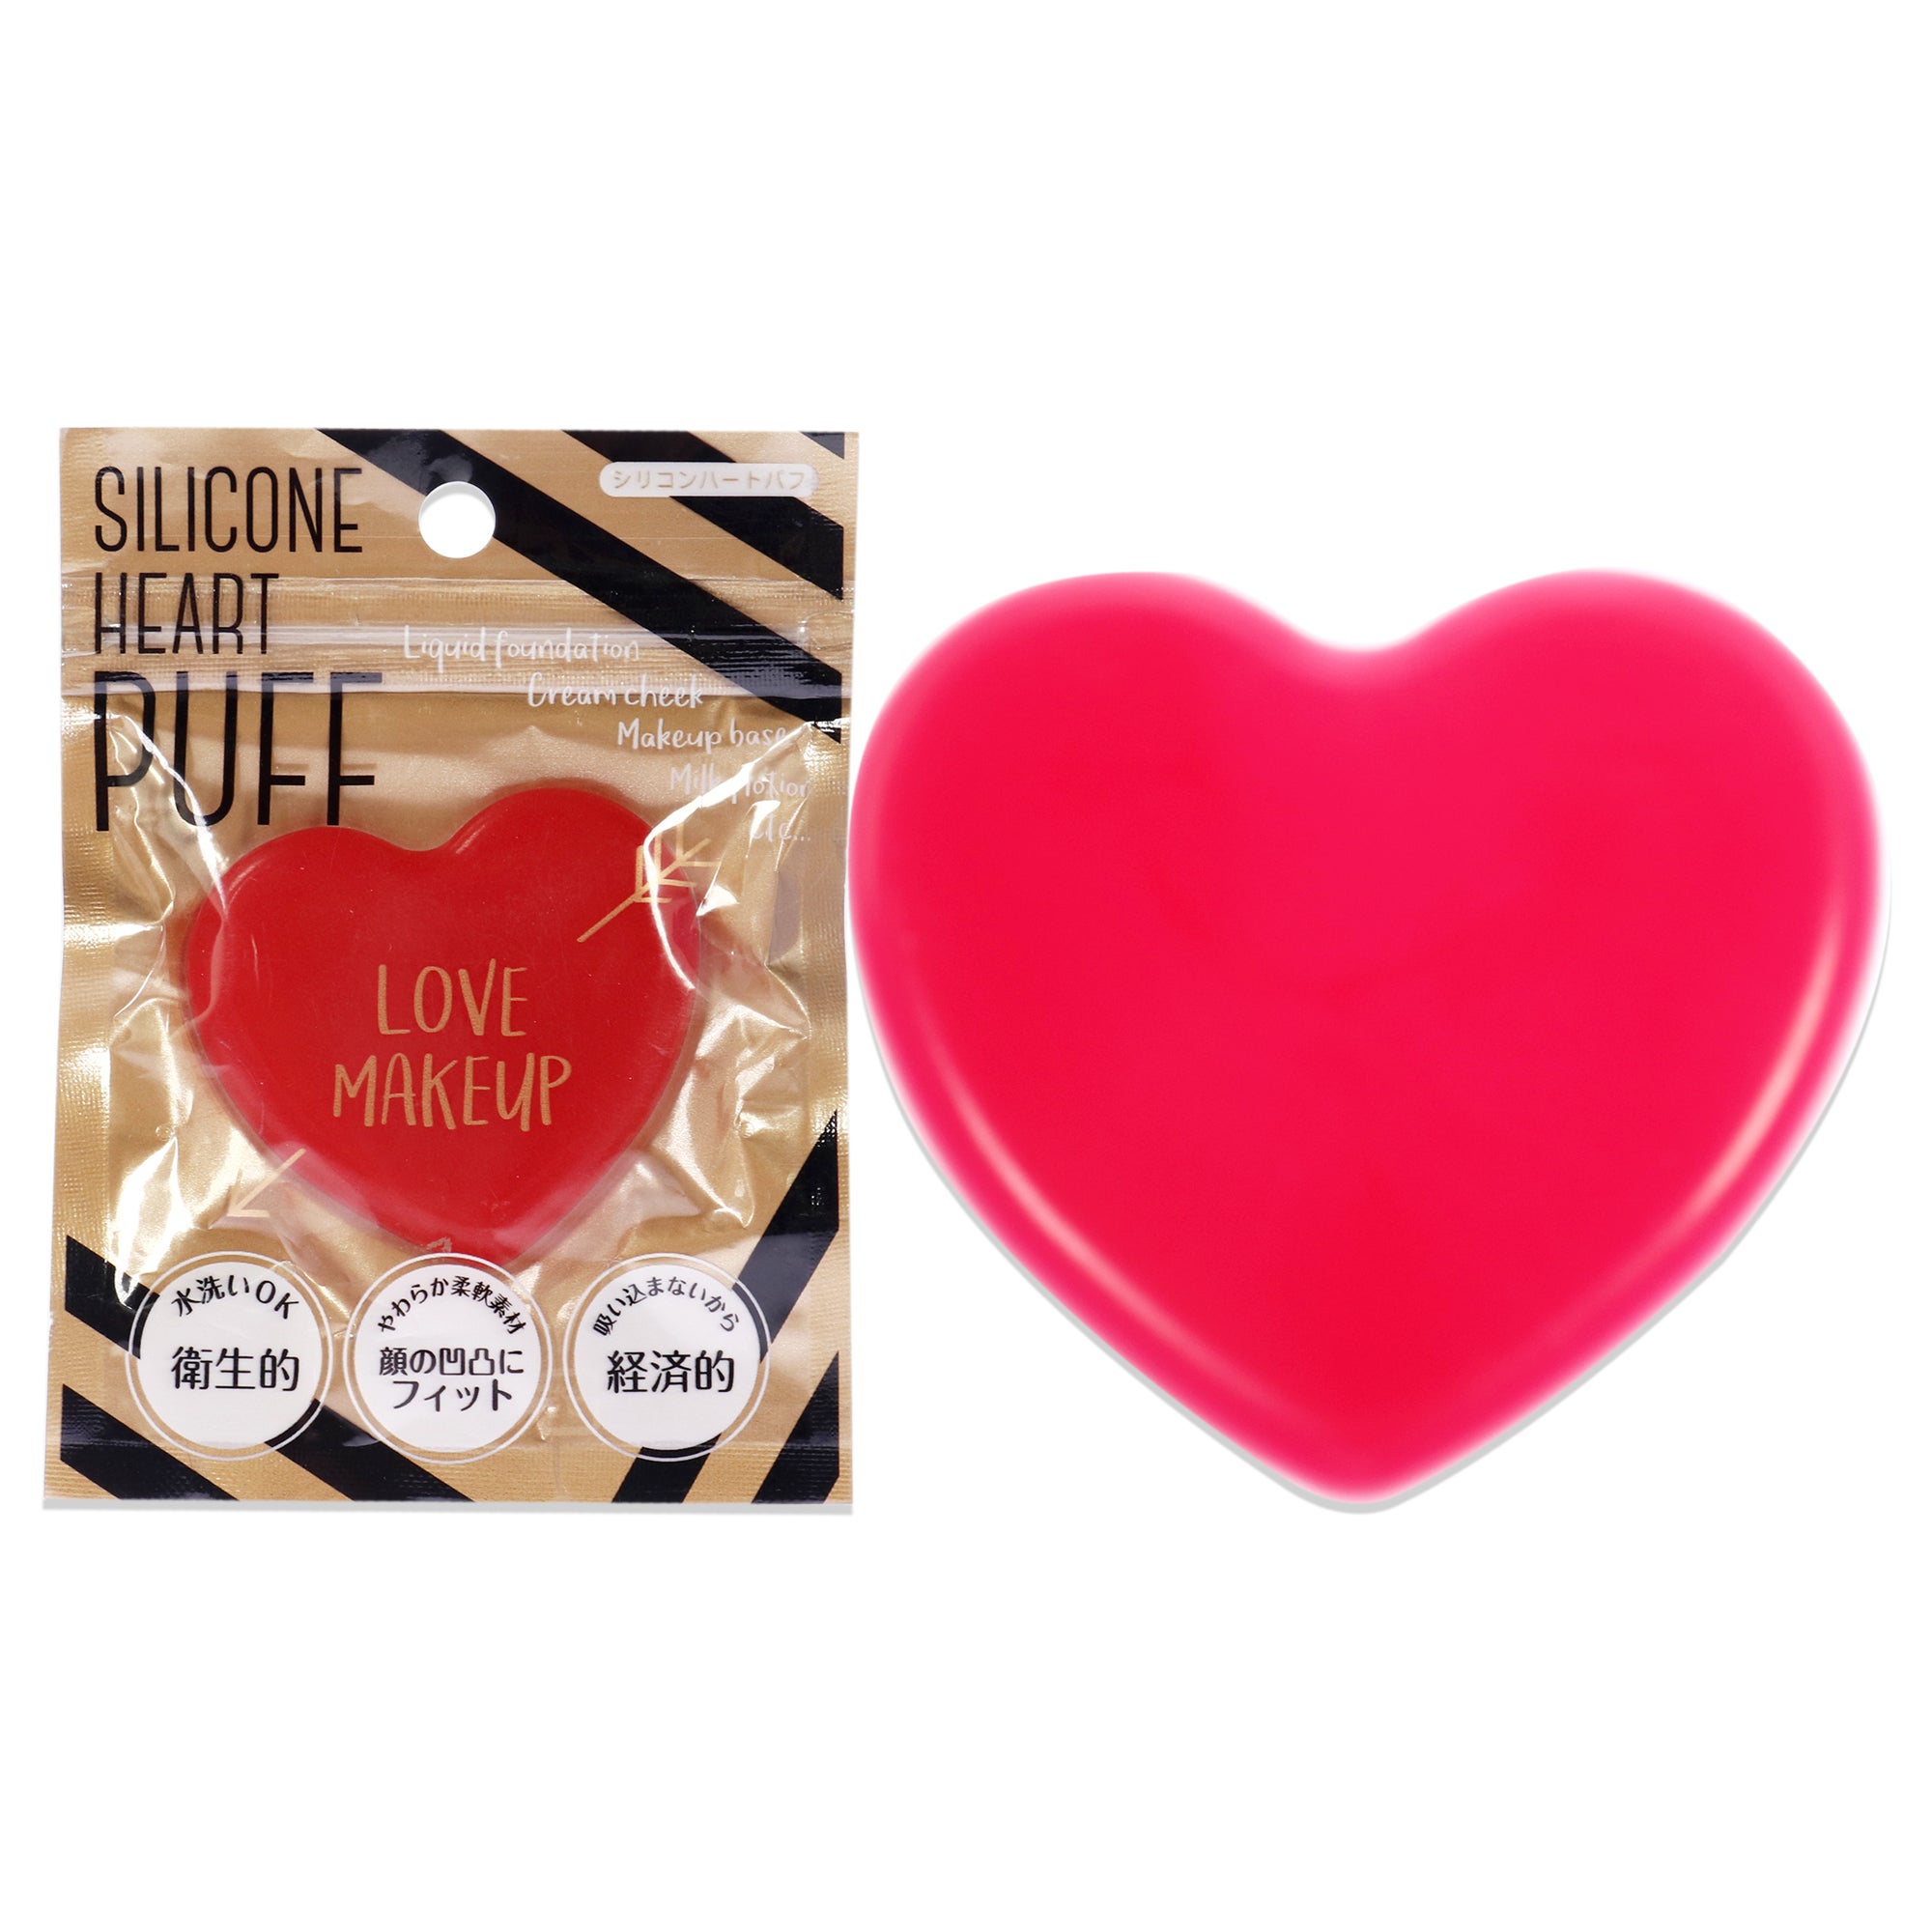 Silicone Heart Puff - Mat Red by Sun Smile for Women - 1 Pc Sponge